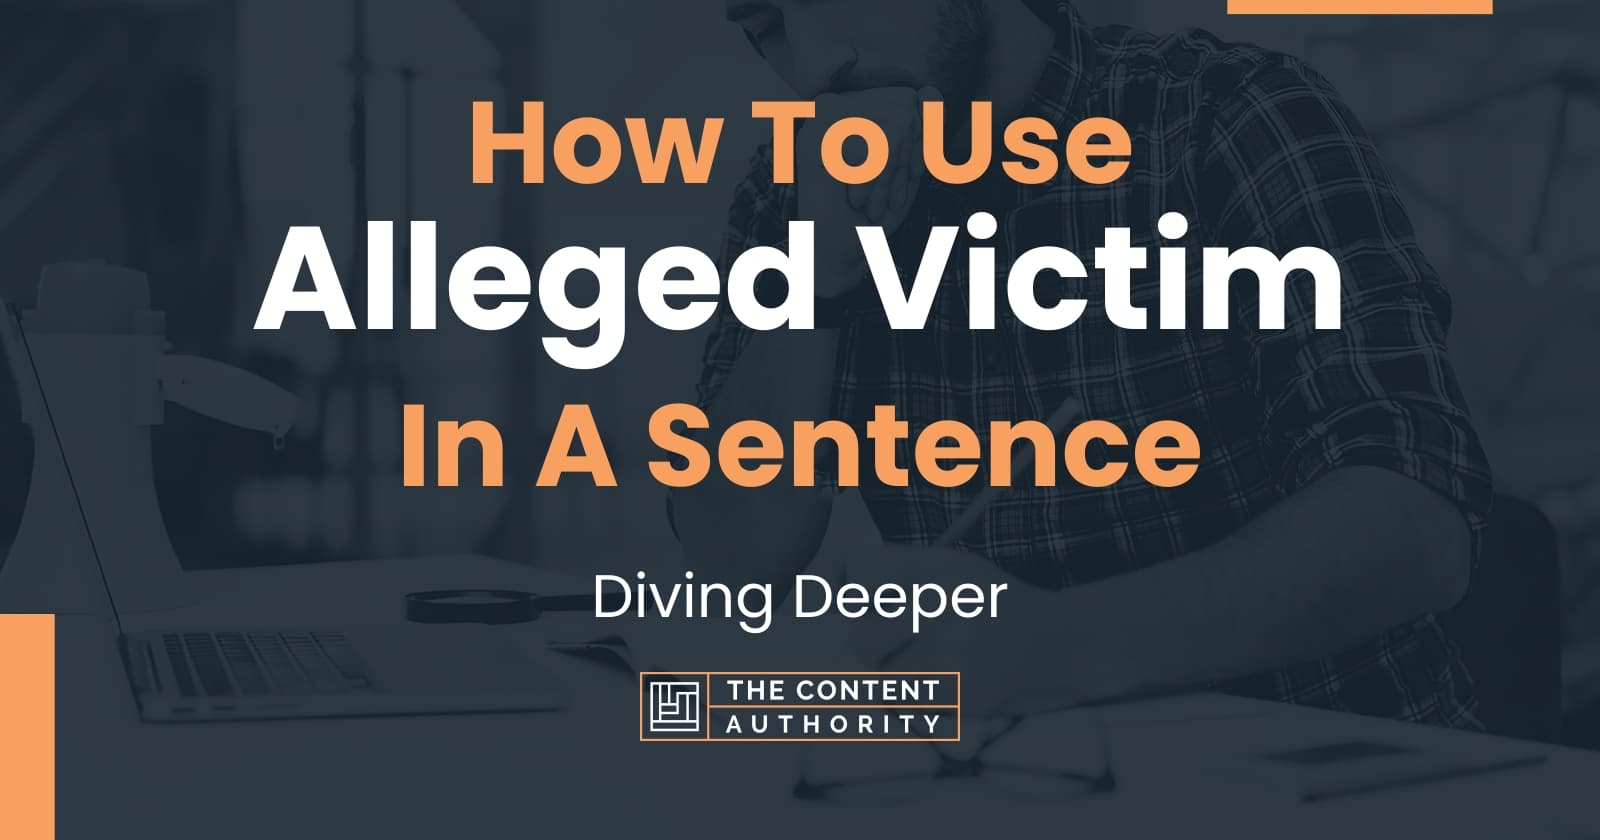 How To Use Alleged Victim In A